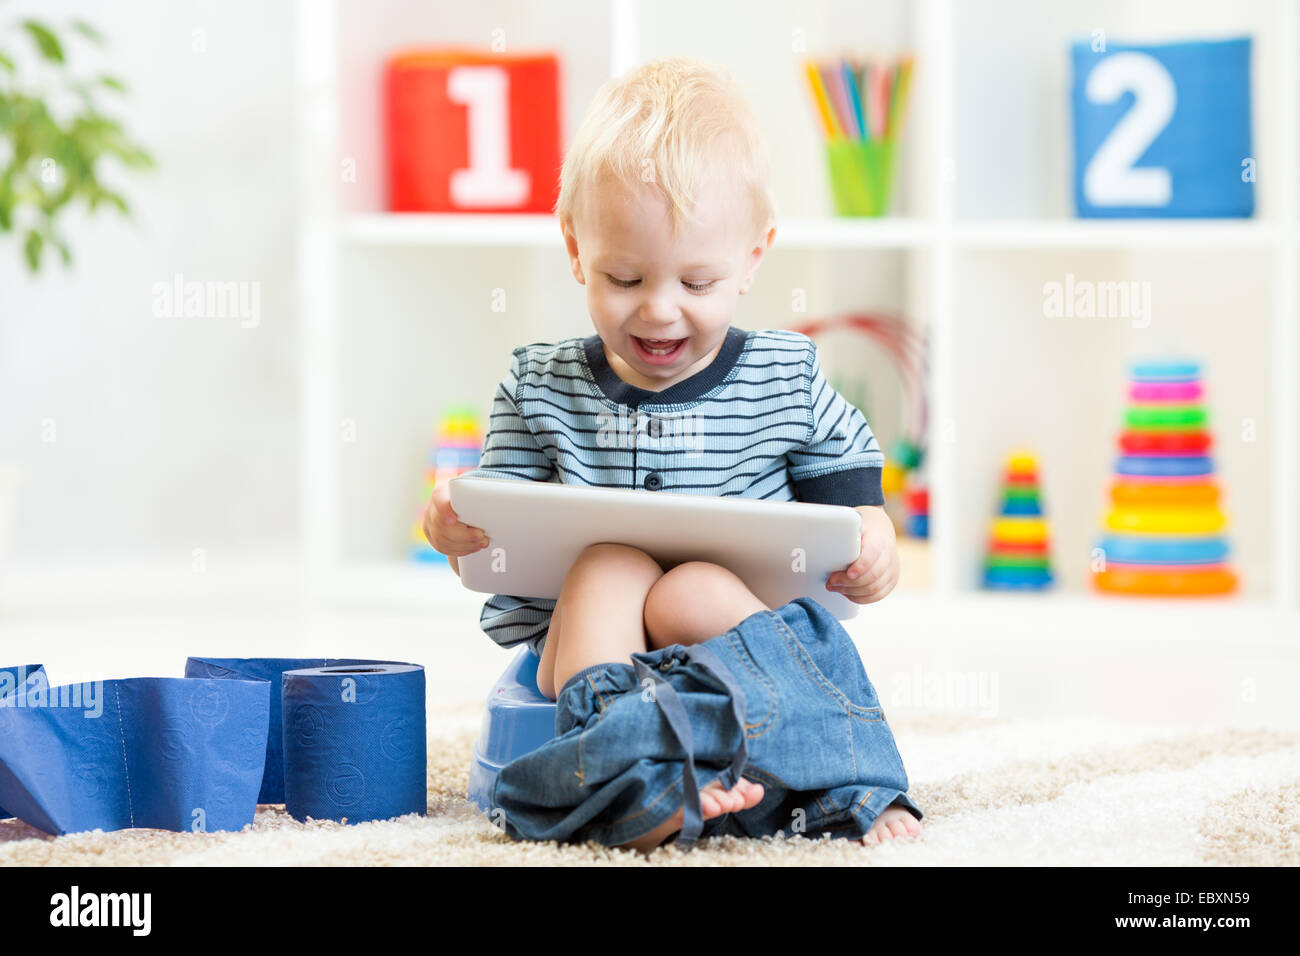 smiling child sitting on chamber pot with toilet paper Stock Photo